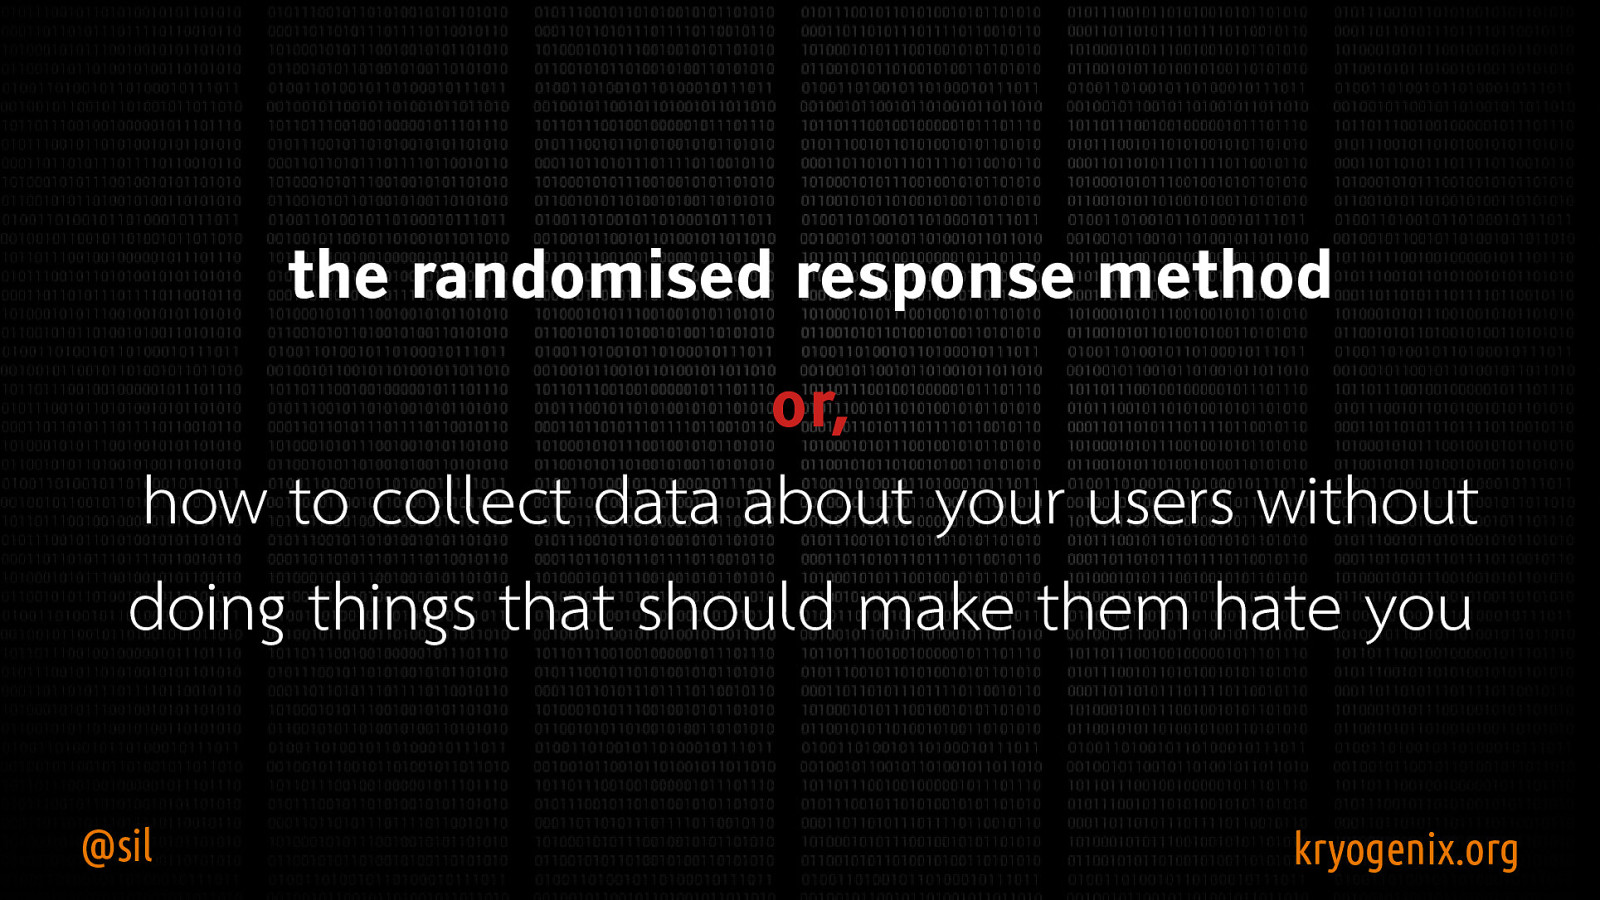 How to collect data about your users without doing things that should make them hate you